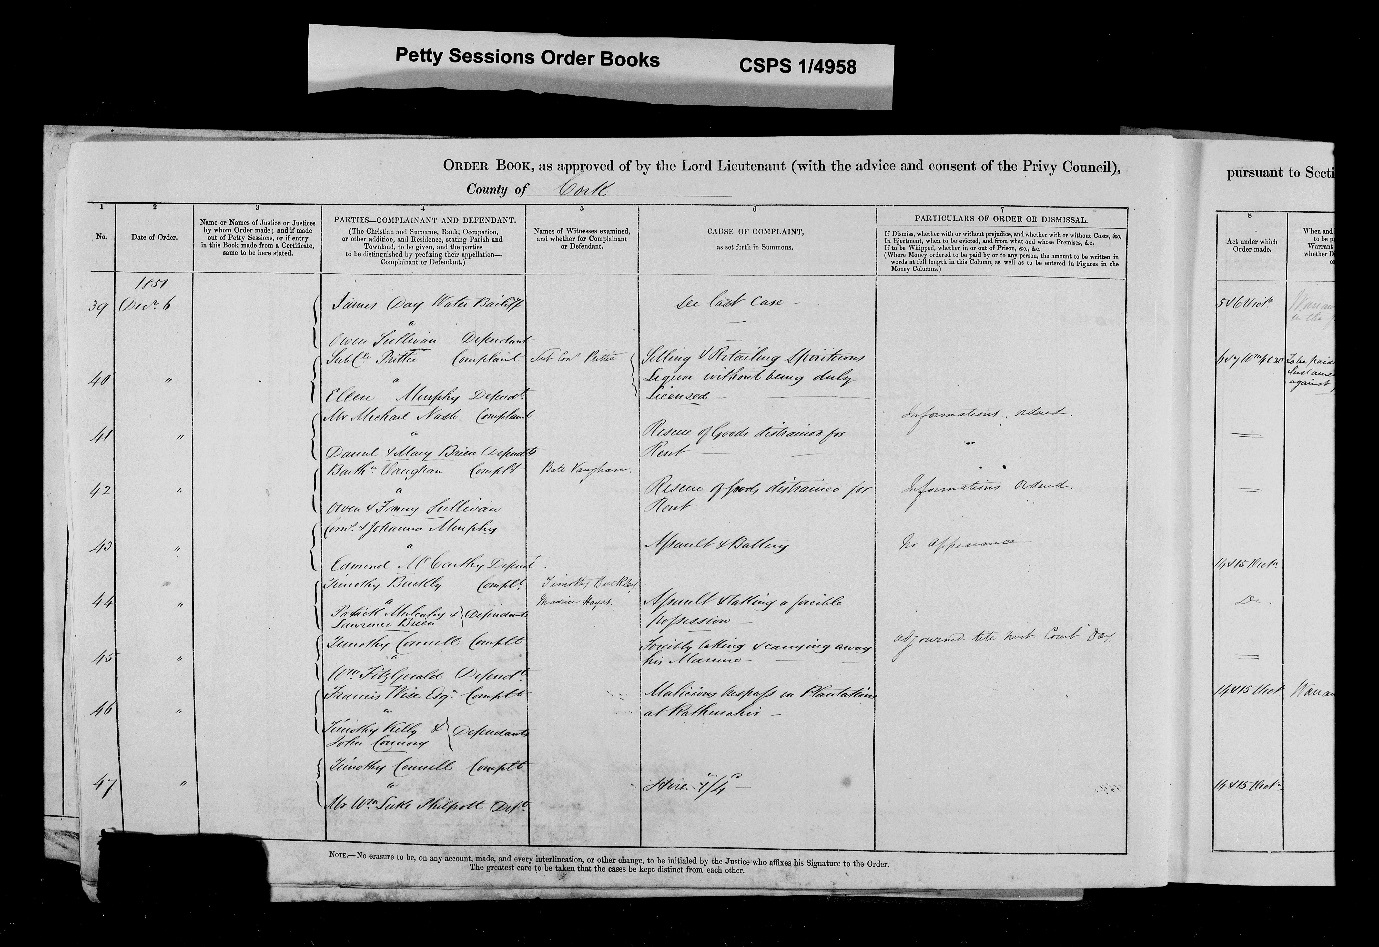 C:\Users\Virginia Rundle\Documents\Ancestry\Wise Files\Wises from Cork\FrancisWise 1851 Petty Sessions Complainant.jpg